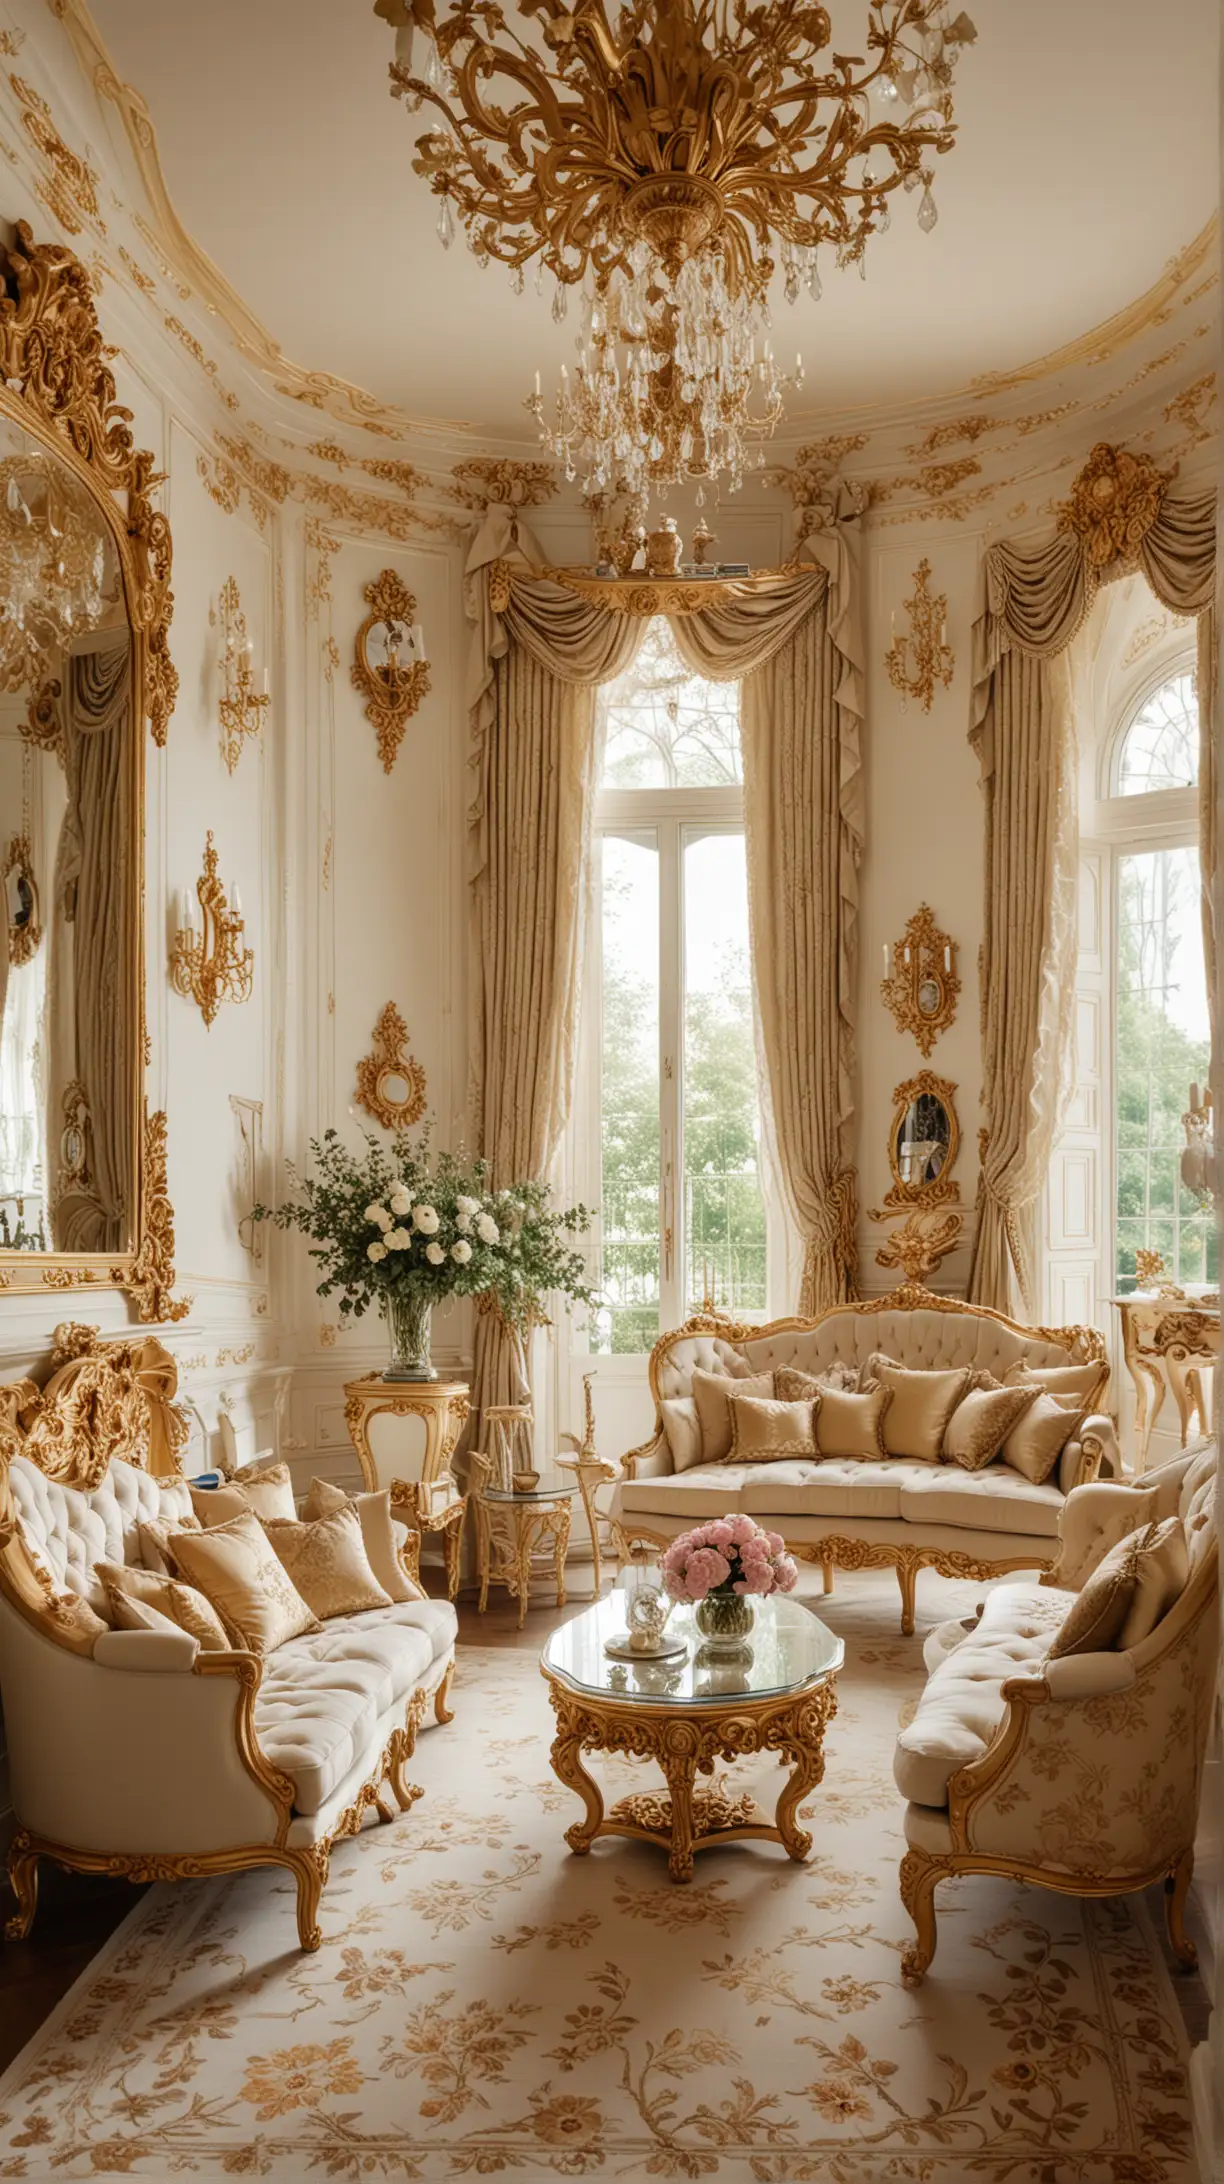 Luxurious Rococo Living Room with Opulent Floral Decor